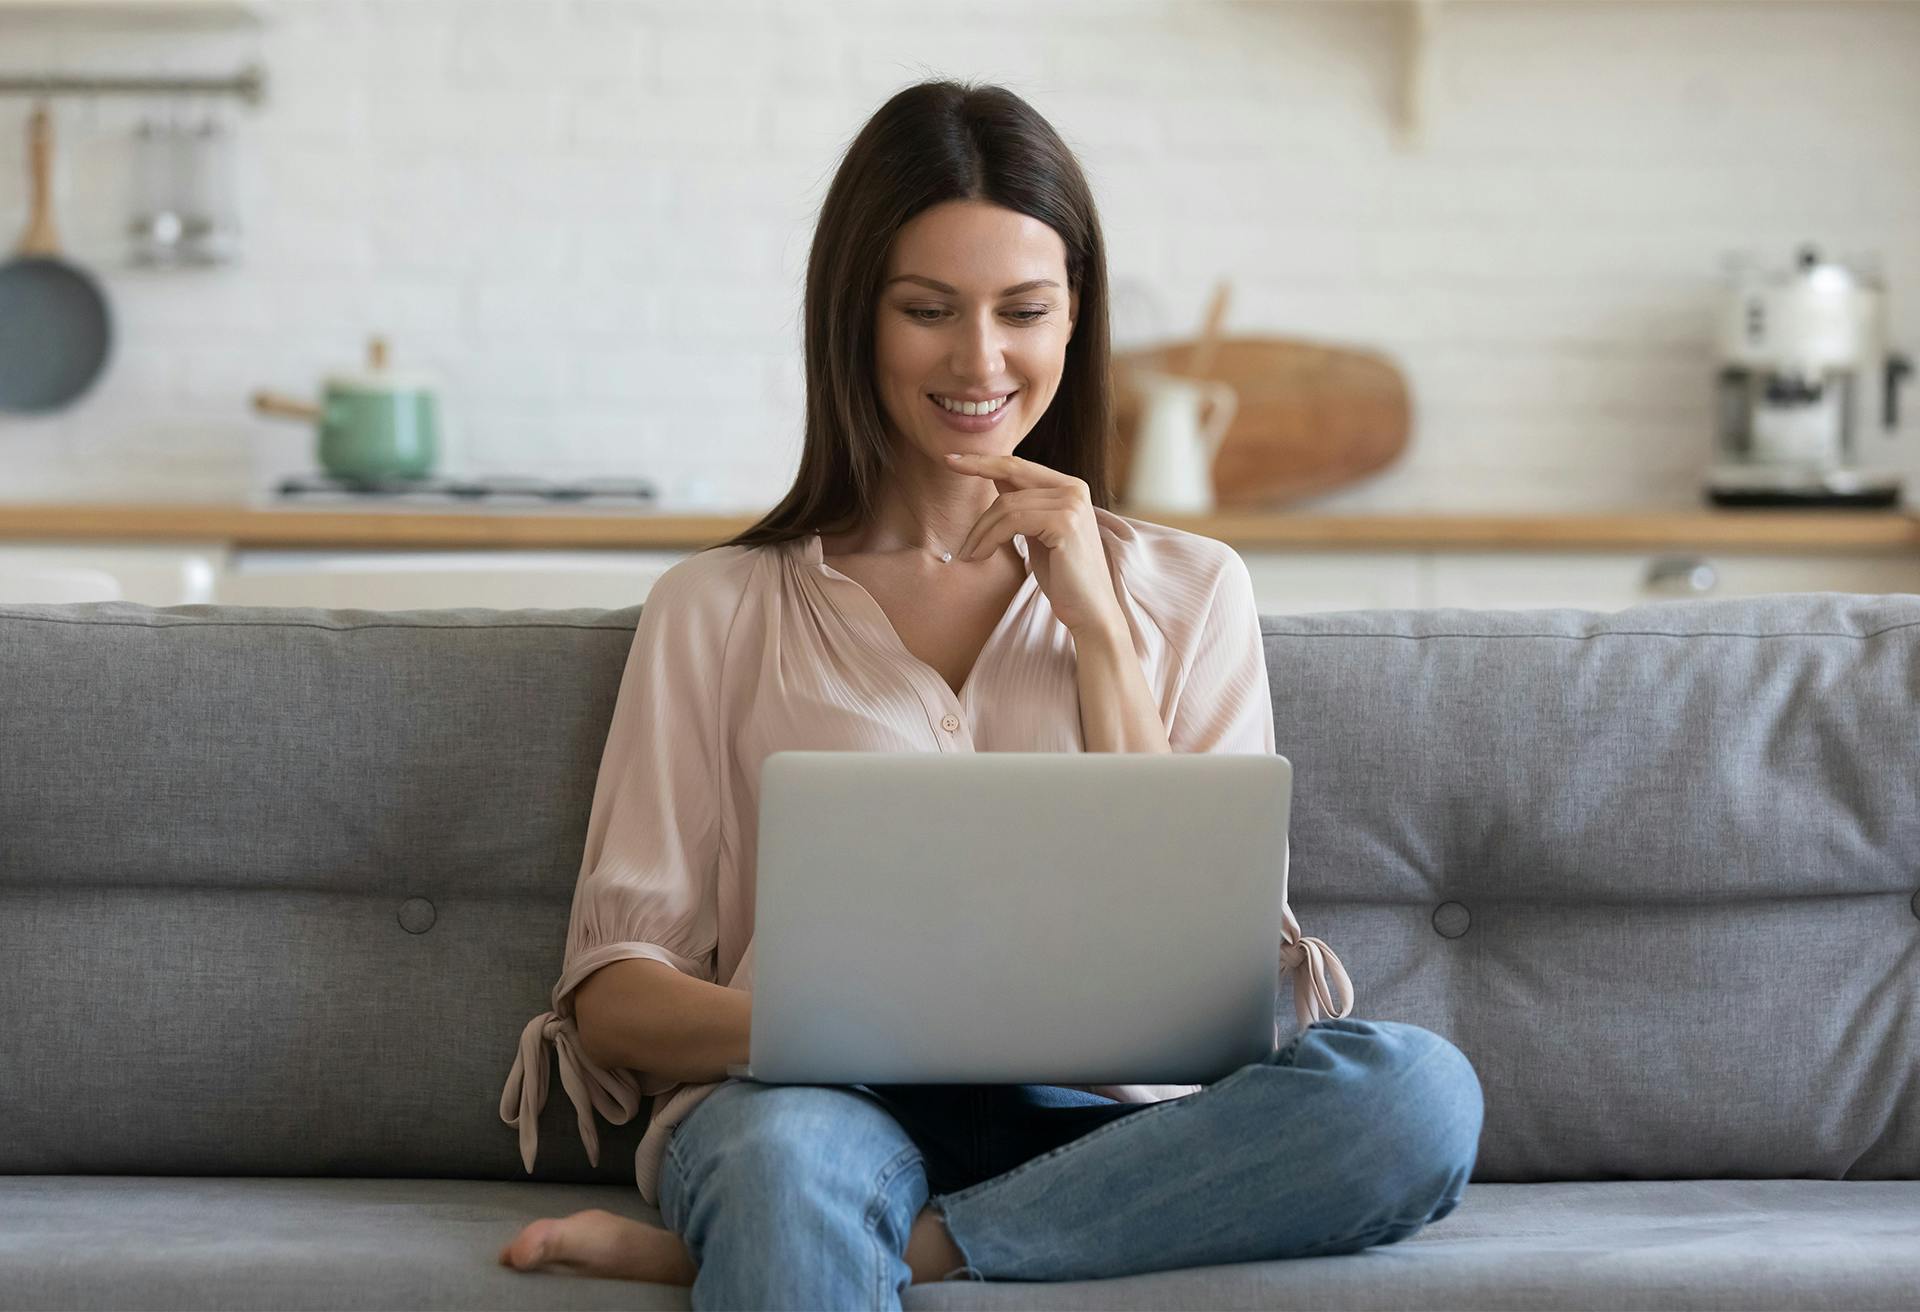 woman sitting on a couch using a laptop computer